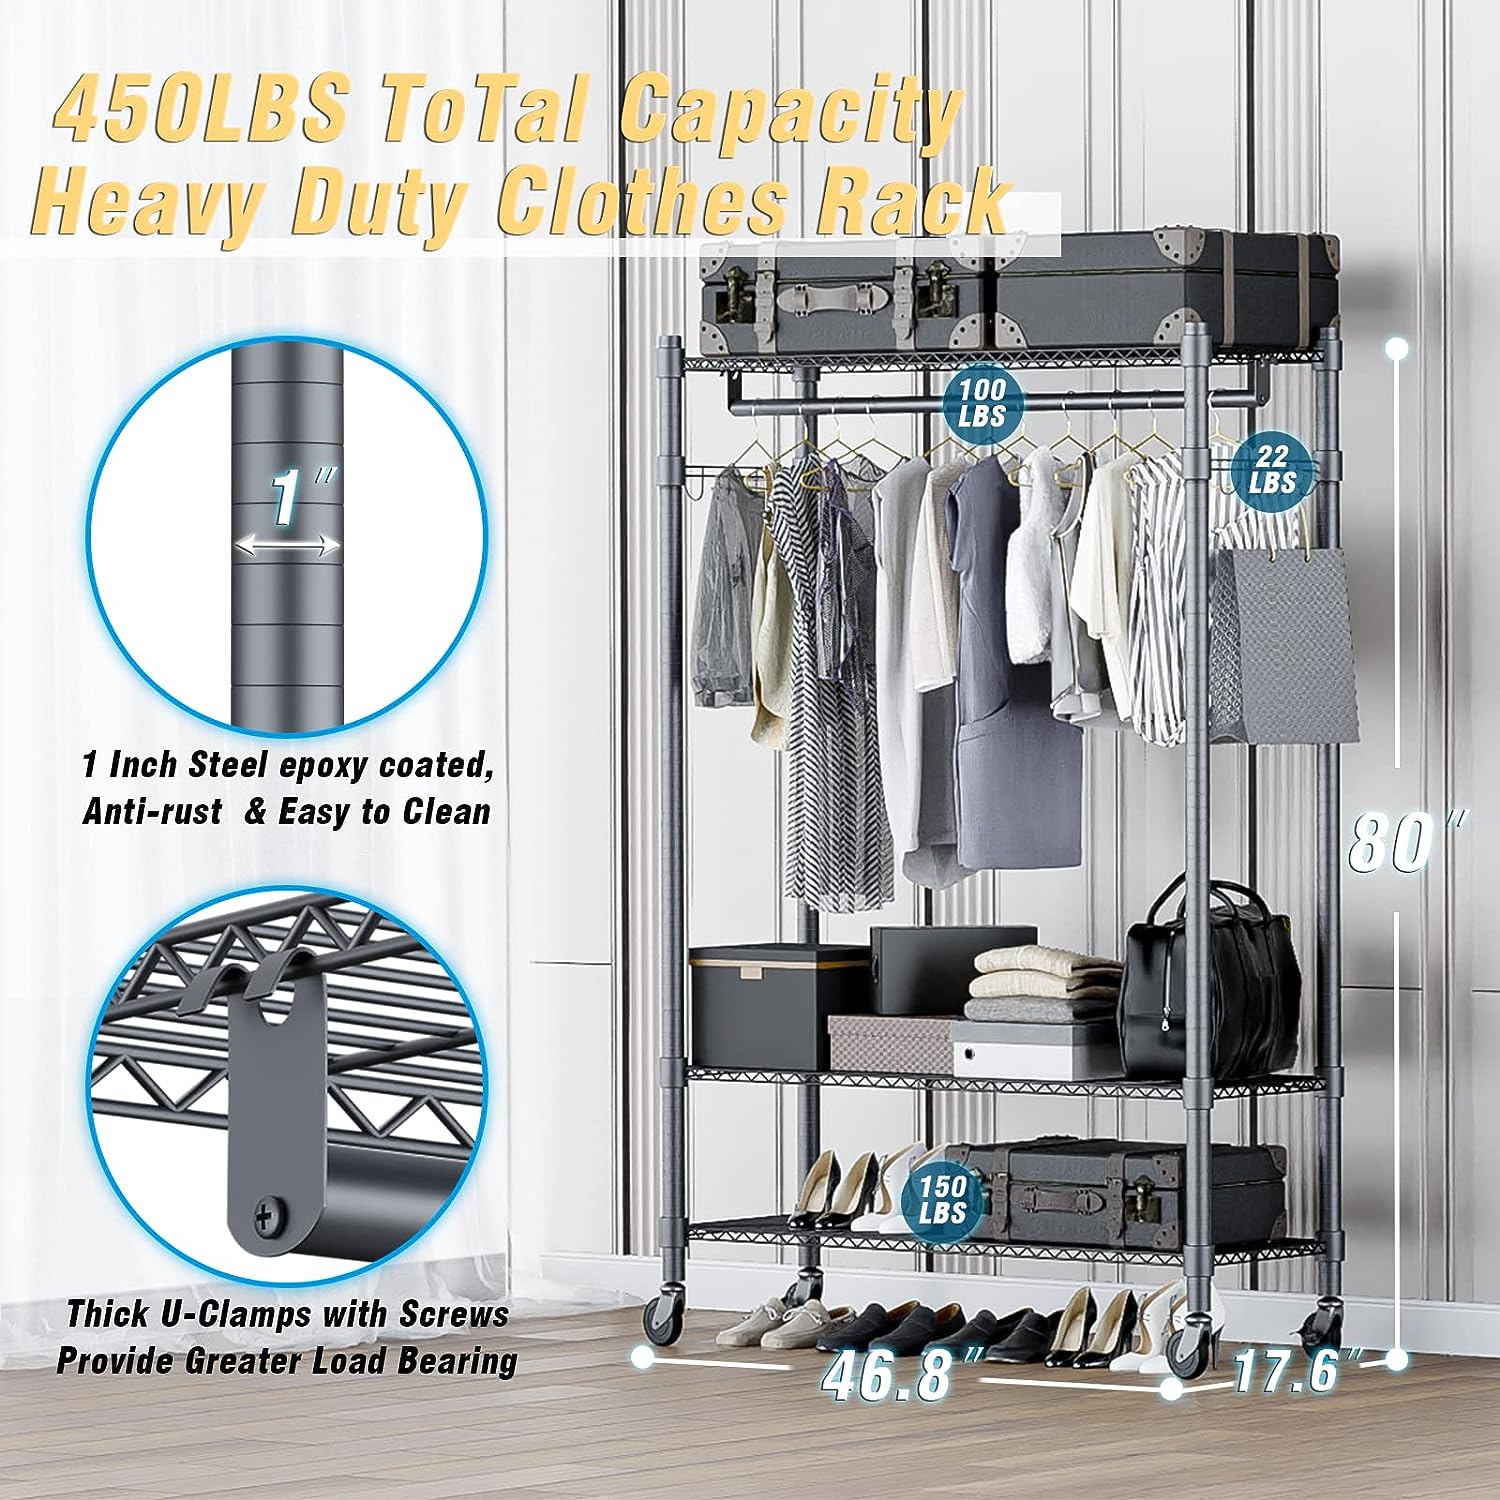 https://bigbigmart.com/wp-content/uploads/2023/11/Homdox-3-Shelves-Wire-Shelving-Clothing-Rolling-Rack-Heavy-Duty-Commercial-Grade-Garment-Rack-with-Wheels-and-Side-Hooks-One-Pair-Hook-and-Two-Hanging-Rods-Gray3.jpg